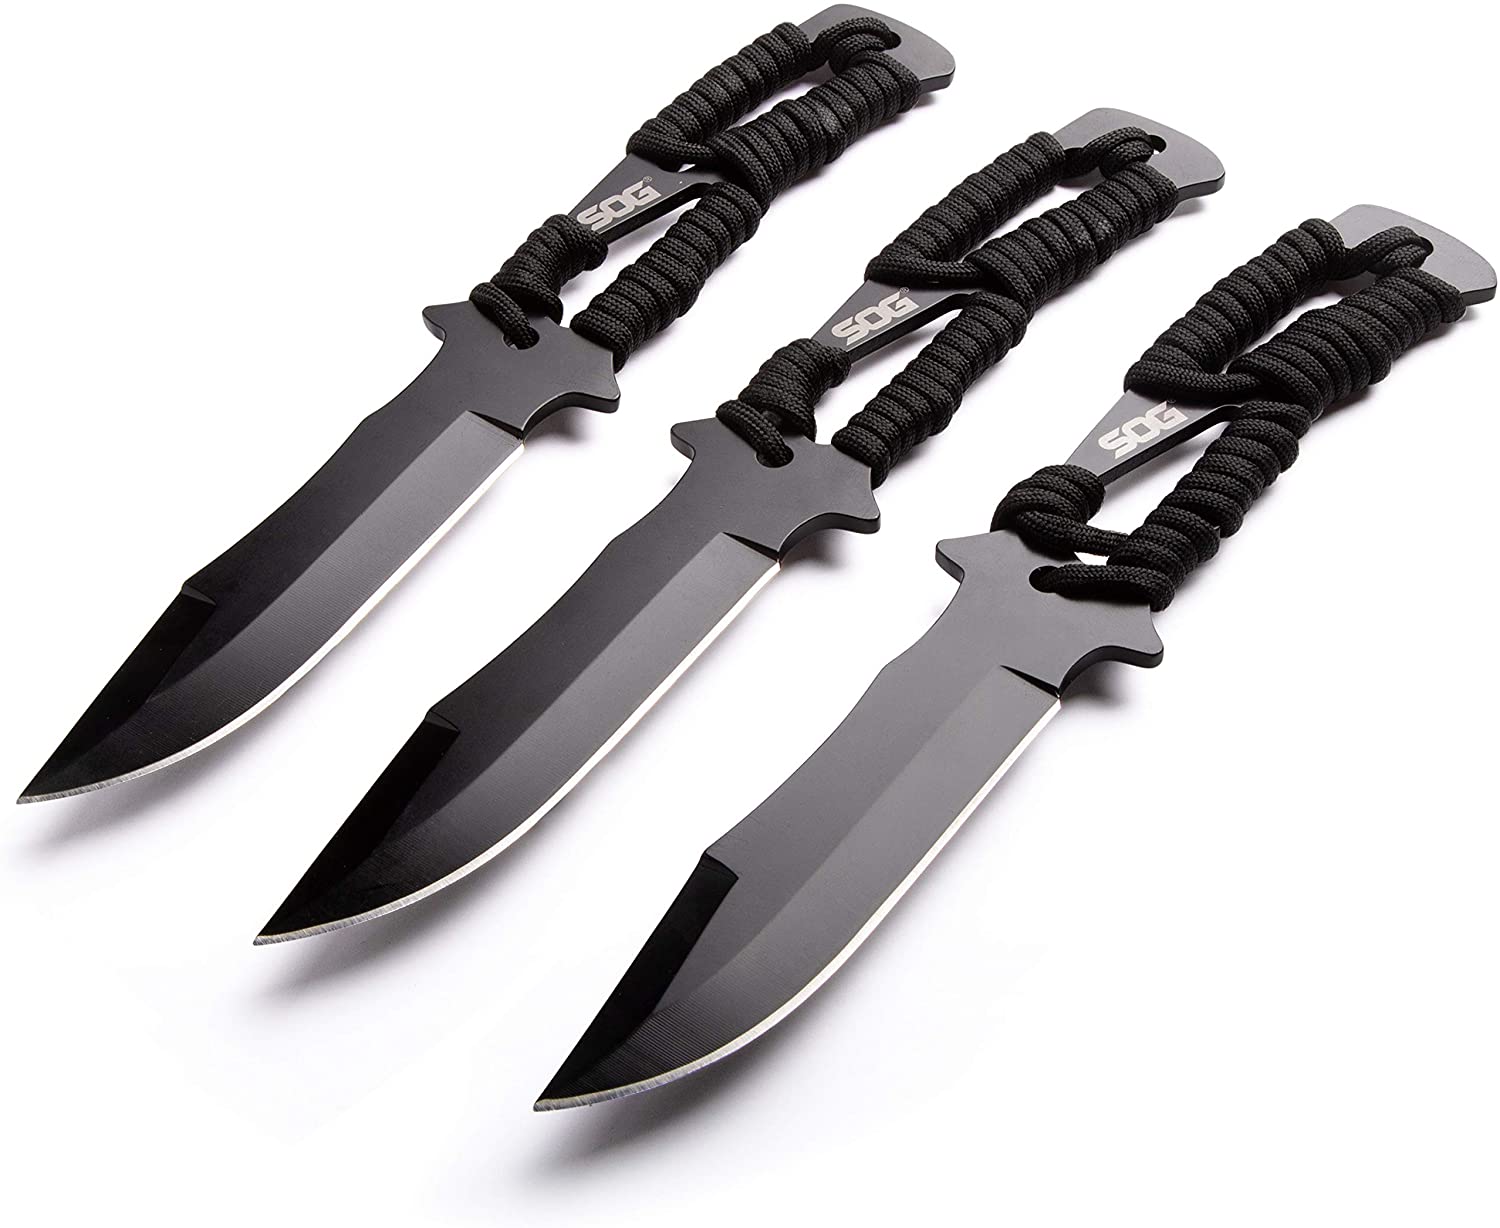 SOG - 3 Pack Balanced Throwing Knives Set w/ Paracord Knife Handles and Professional Throwing Knife Sheath